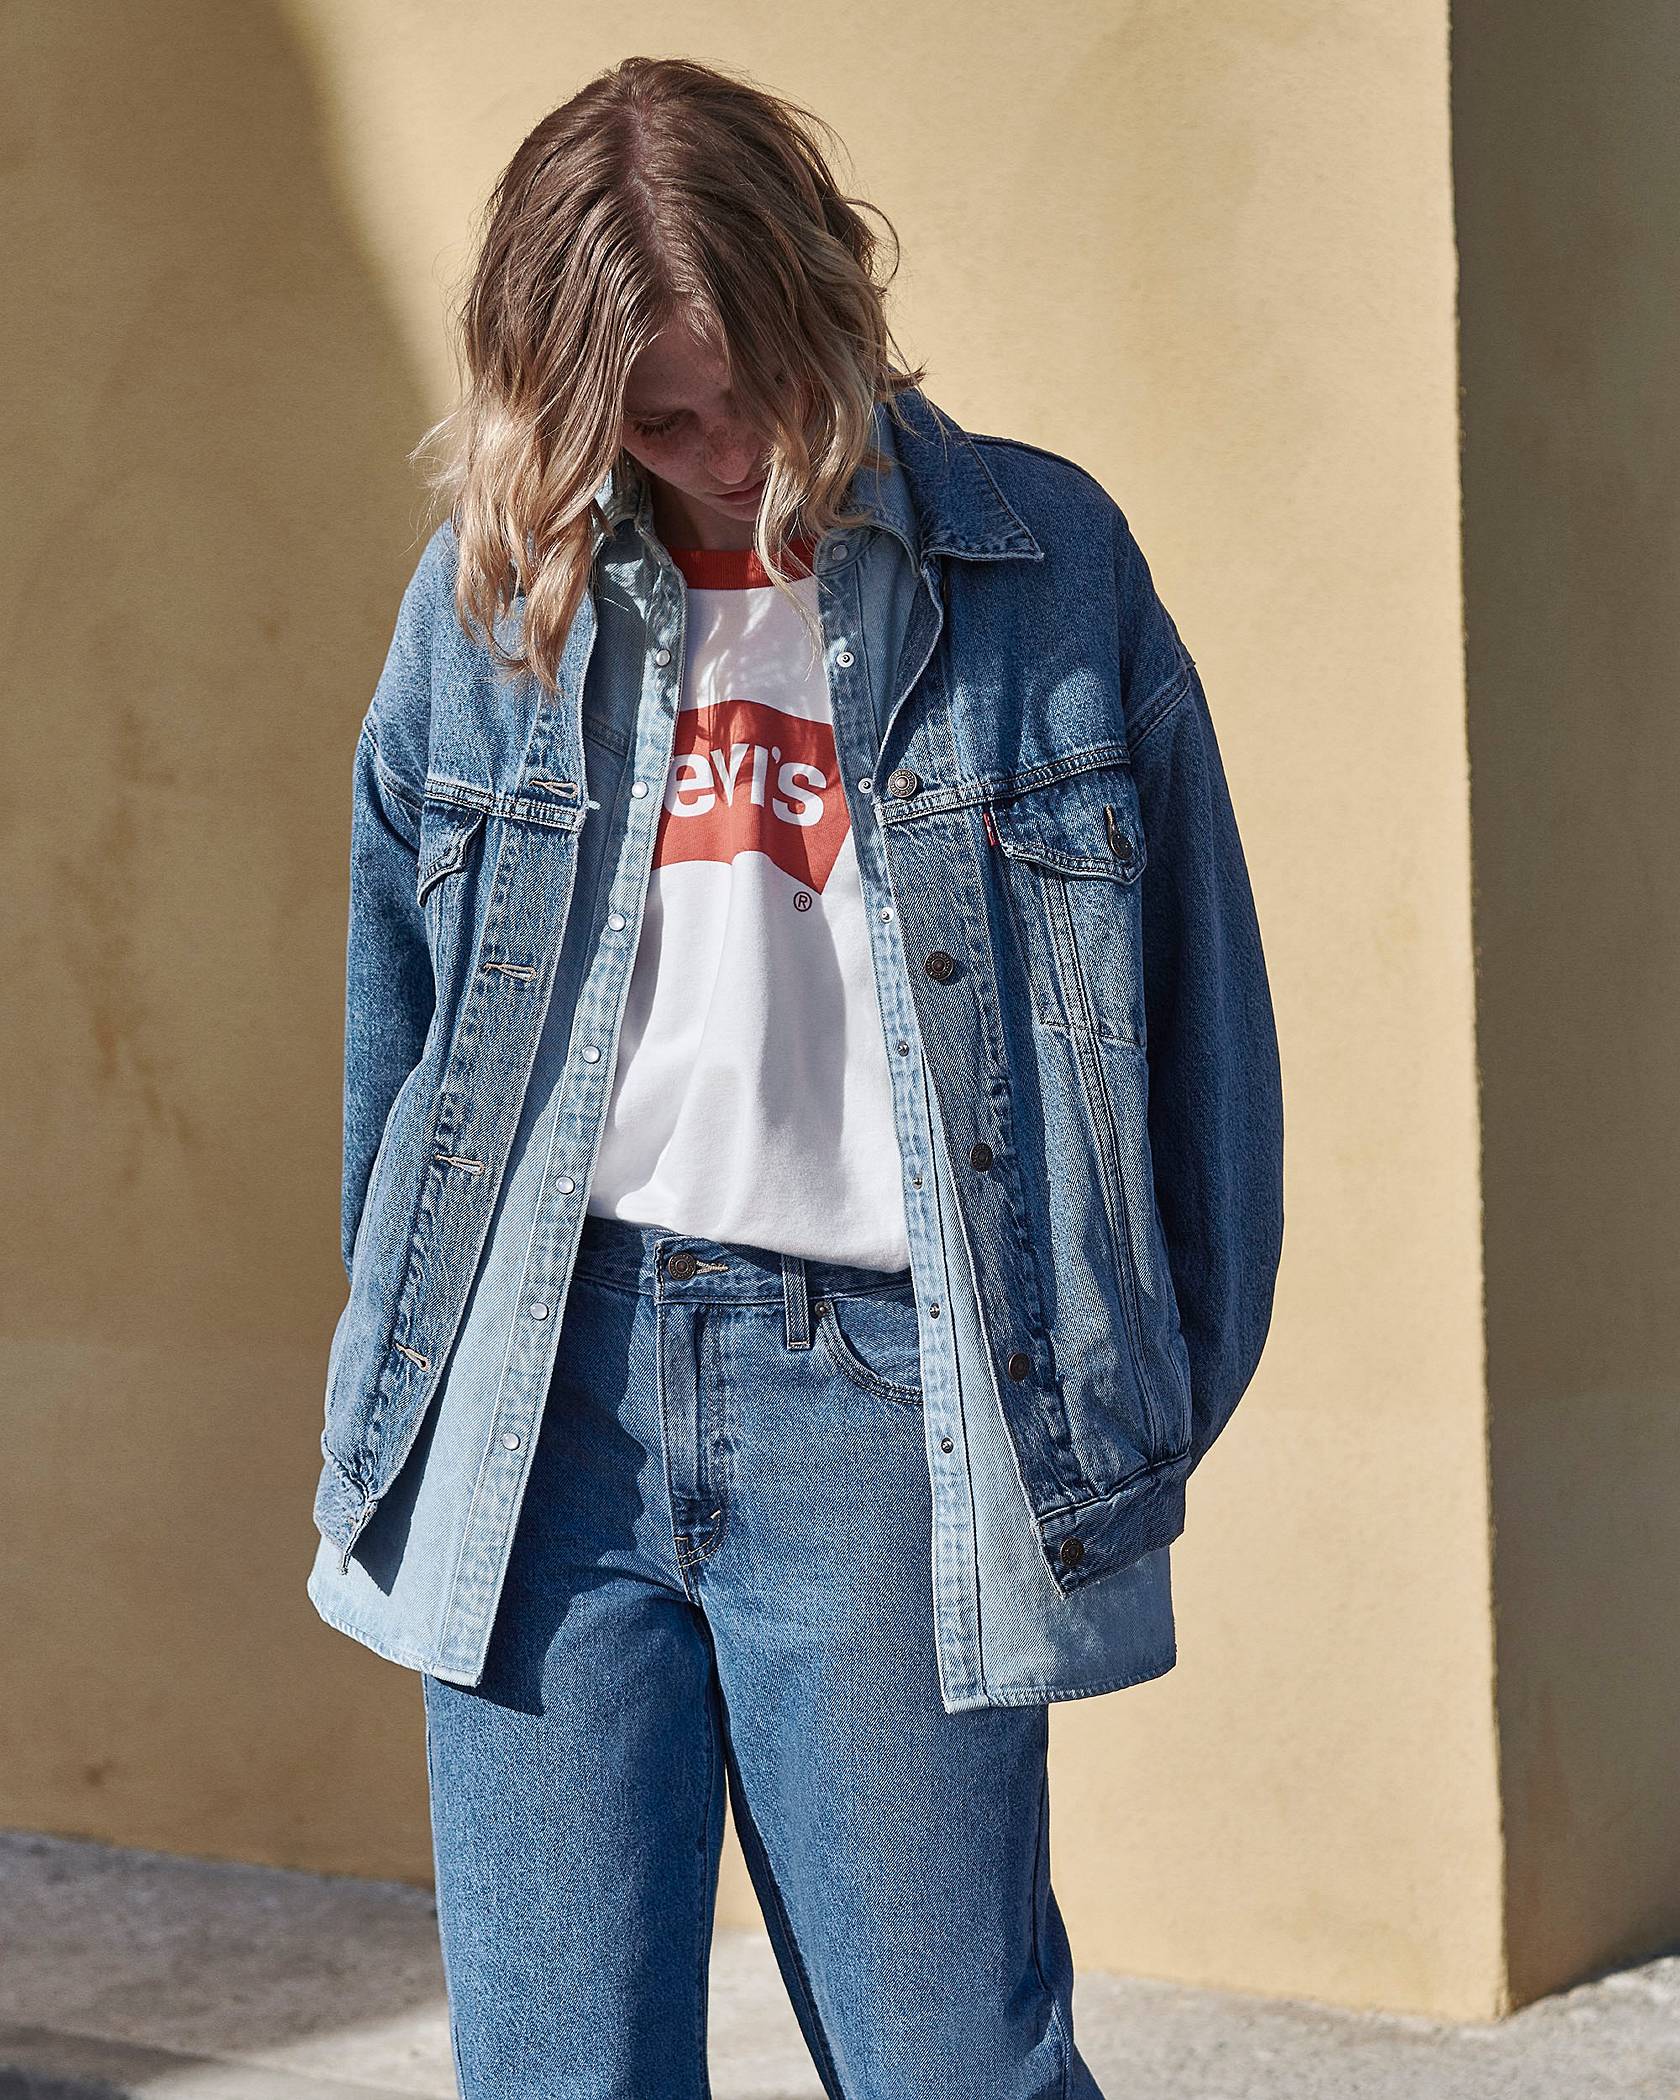 20 Stunning Models of Denim Shirts for Women's in Trend